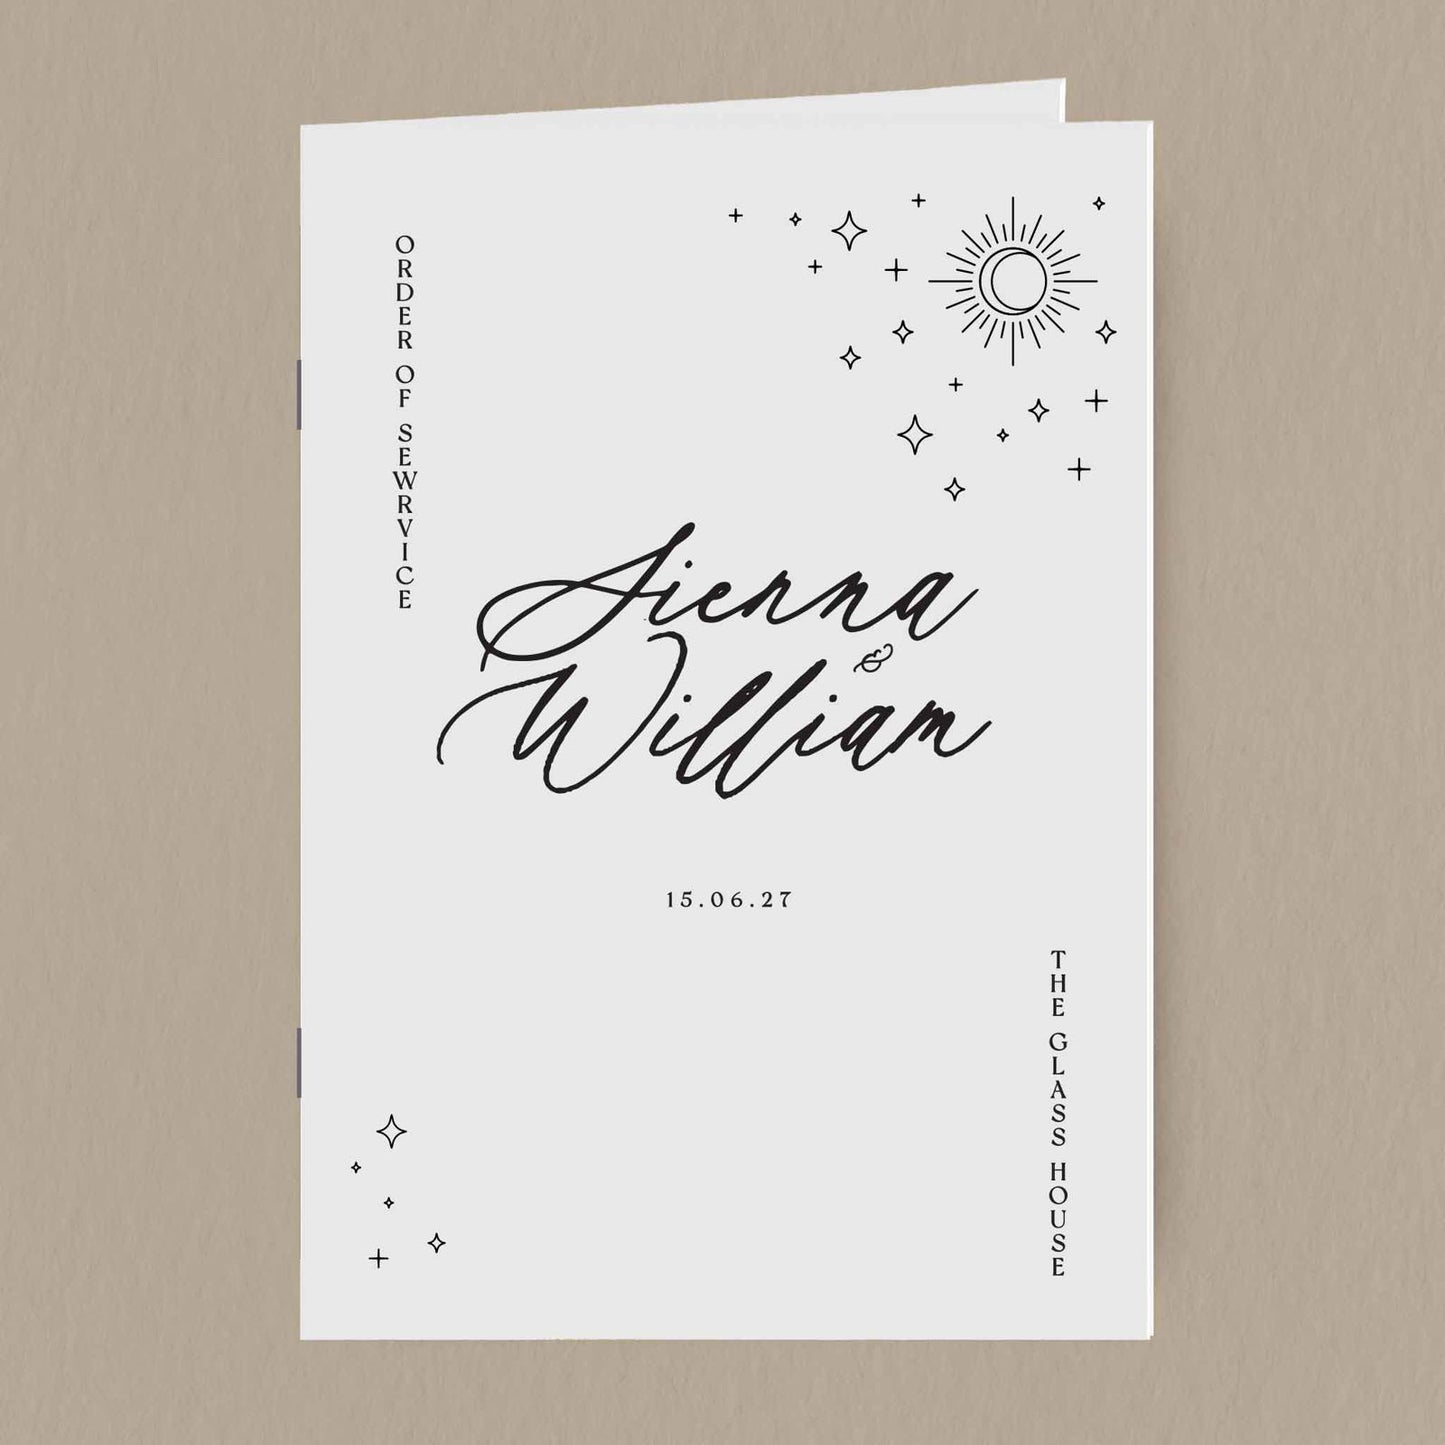 Sienna Order Of Service  Ivy and Gold Wedding Stationery   